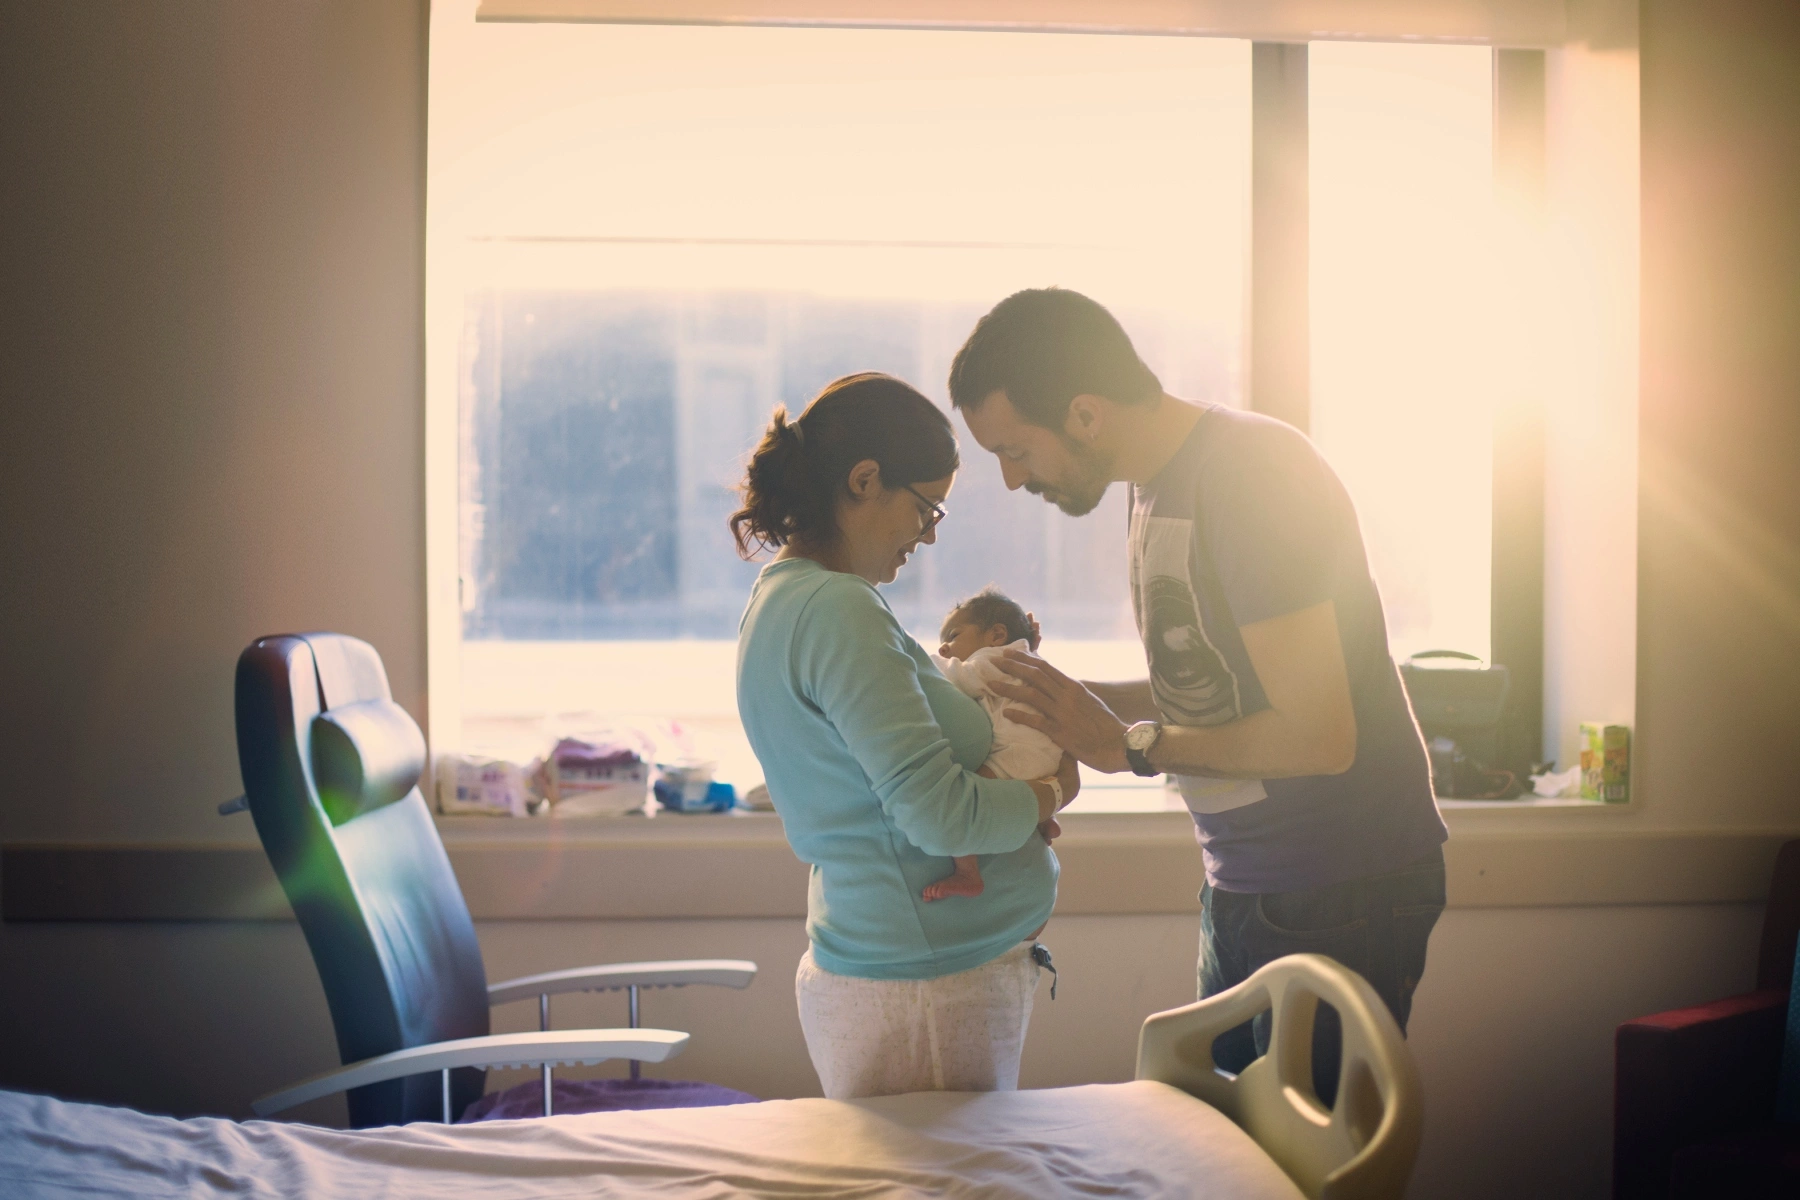 parents holding a newborn baby in a hospital room and looking at it lovingly